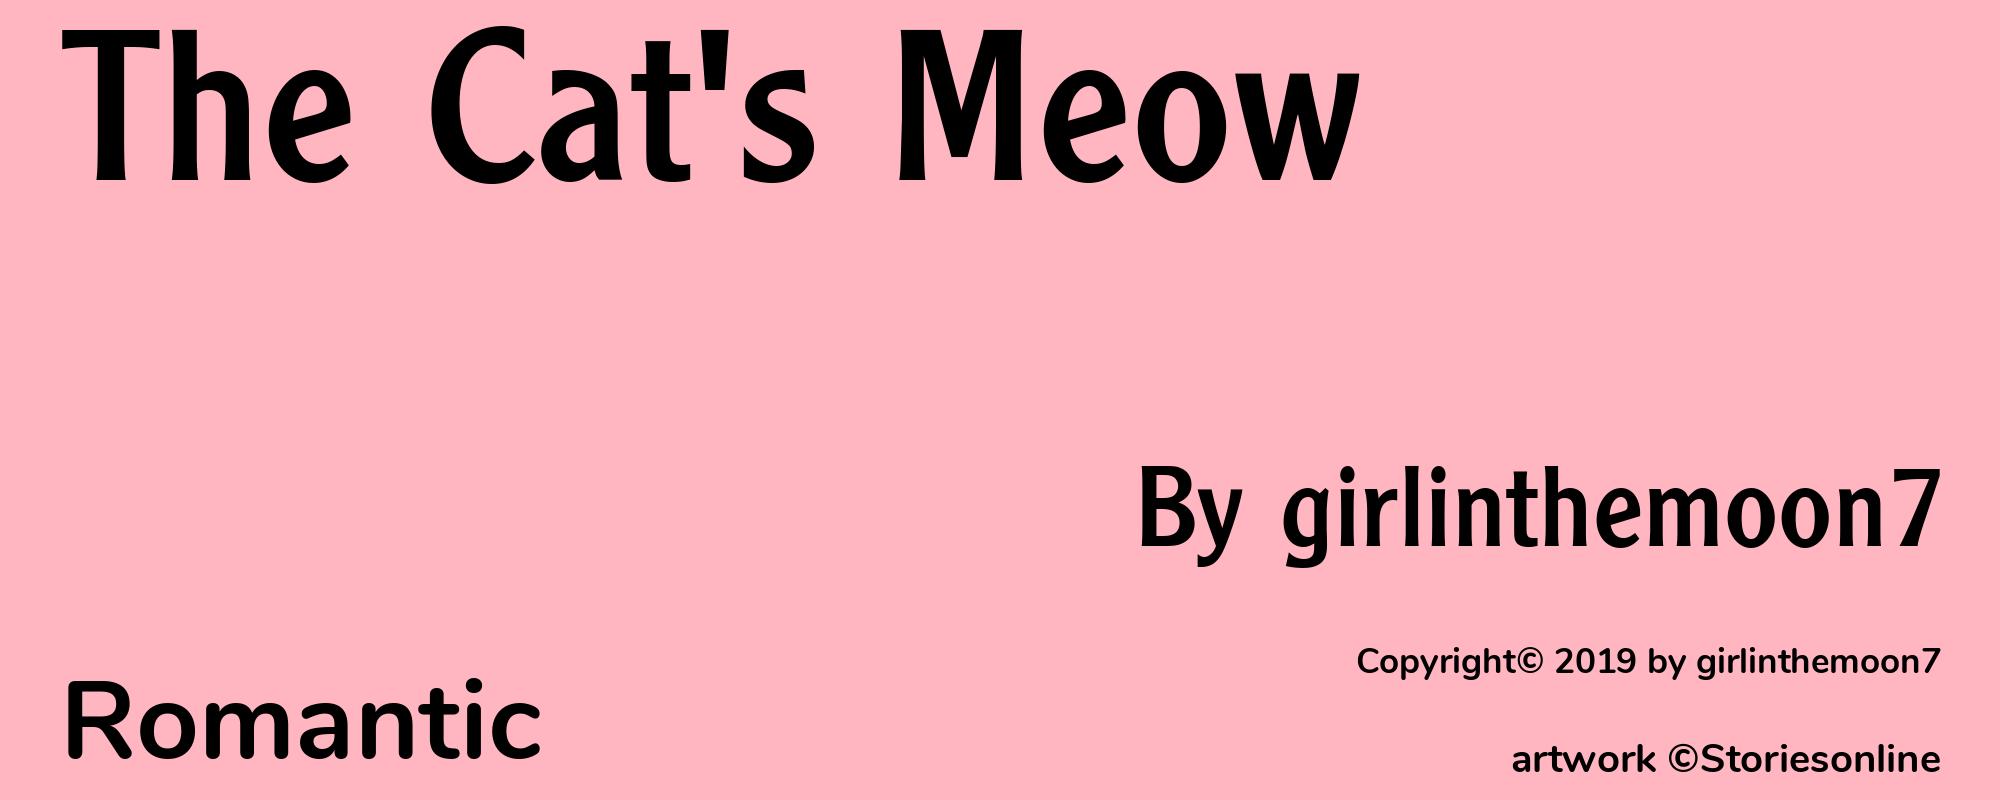 The Cat's Meow - Cover